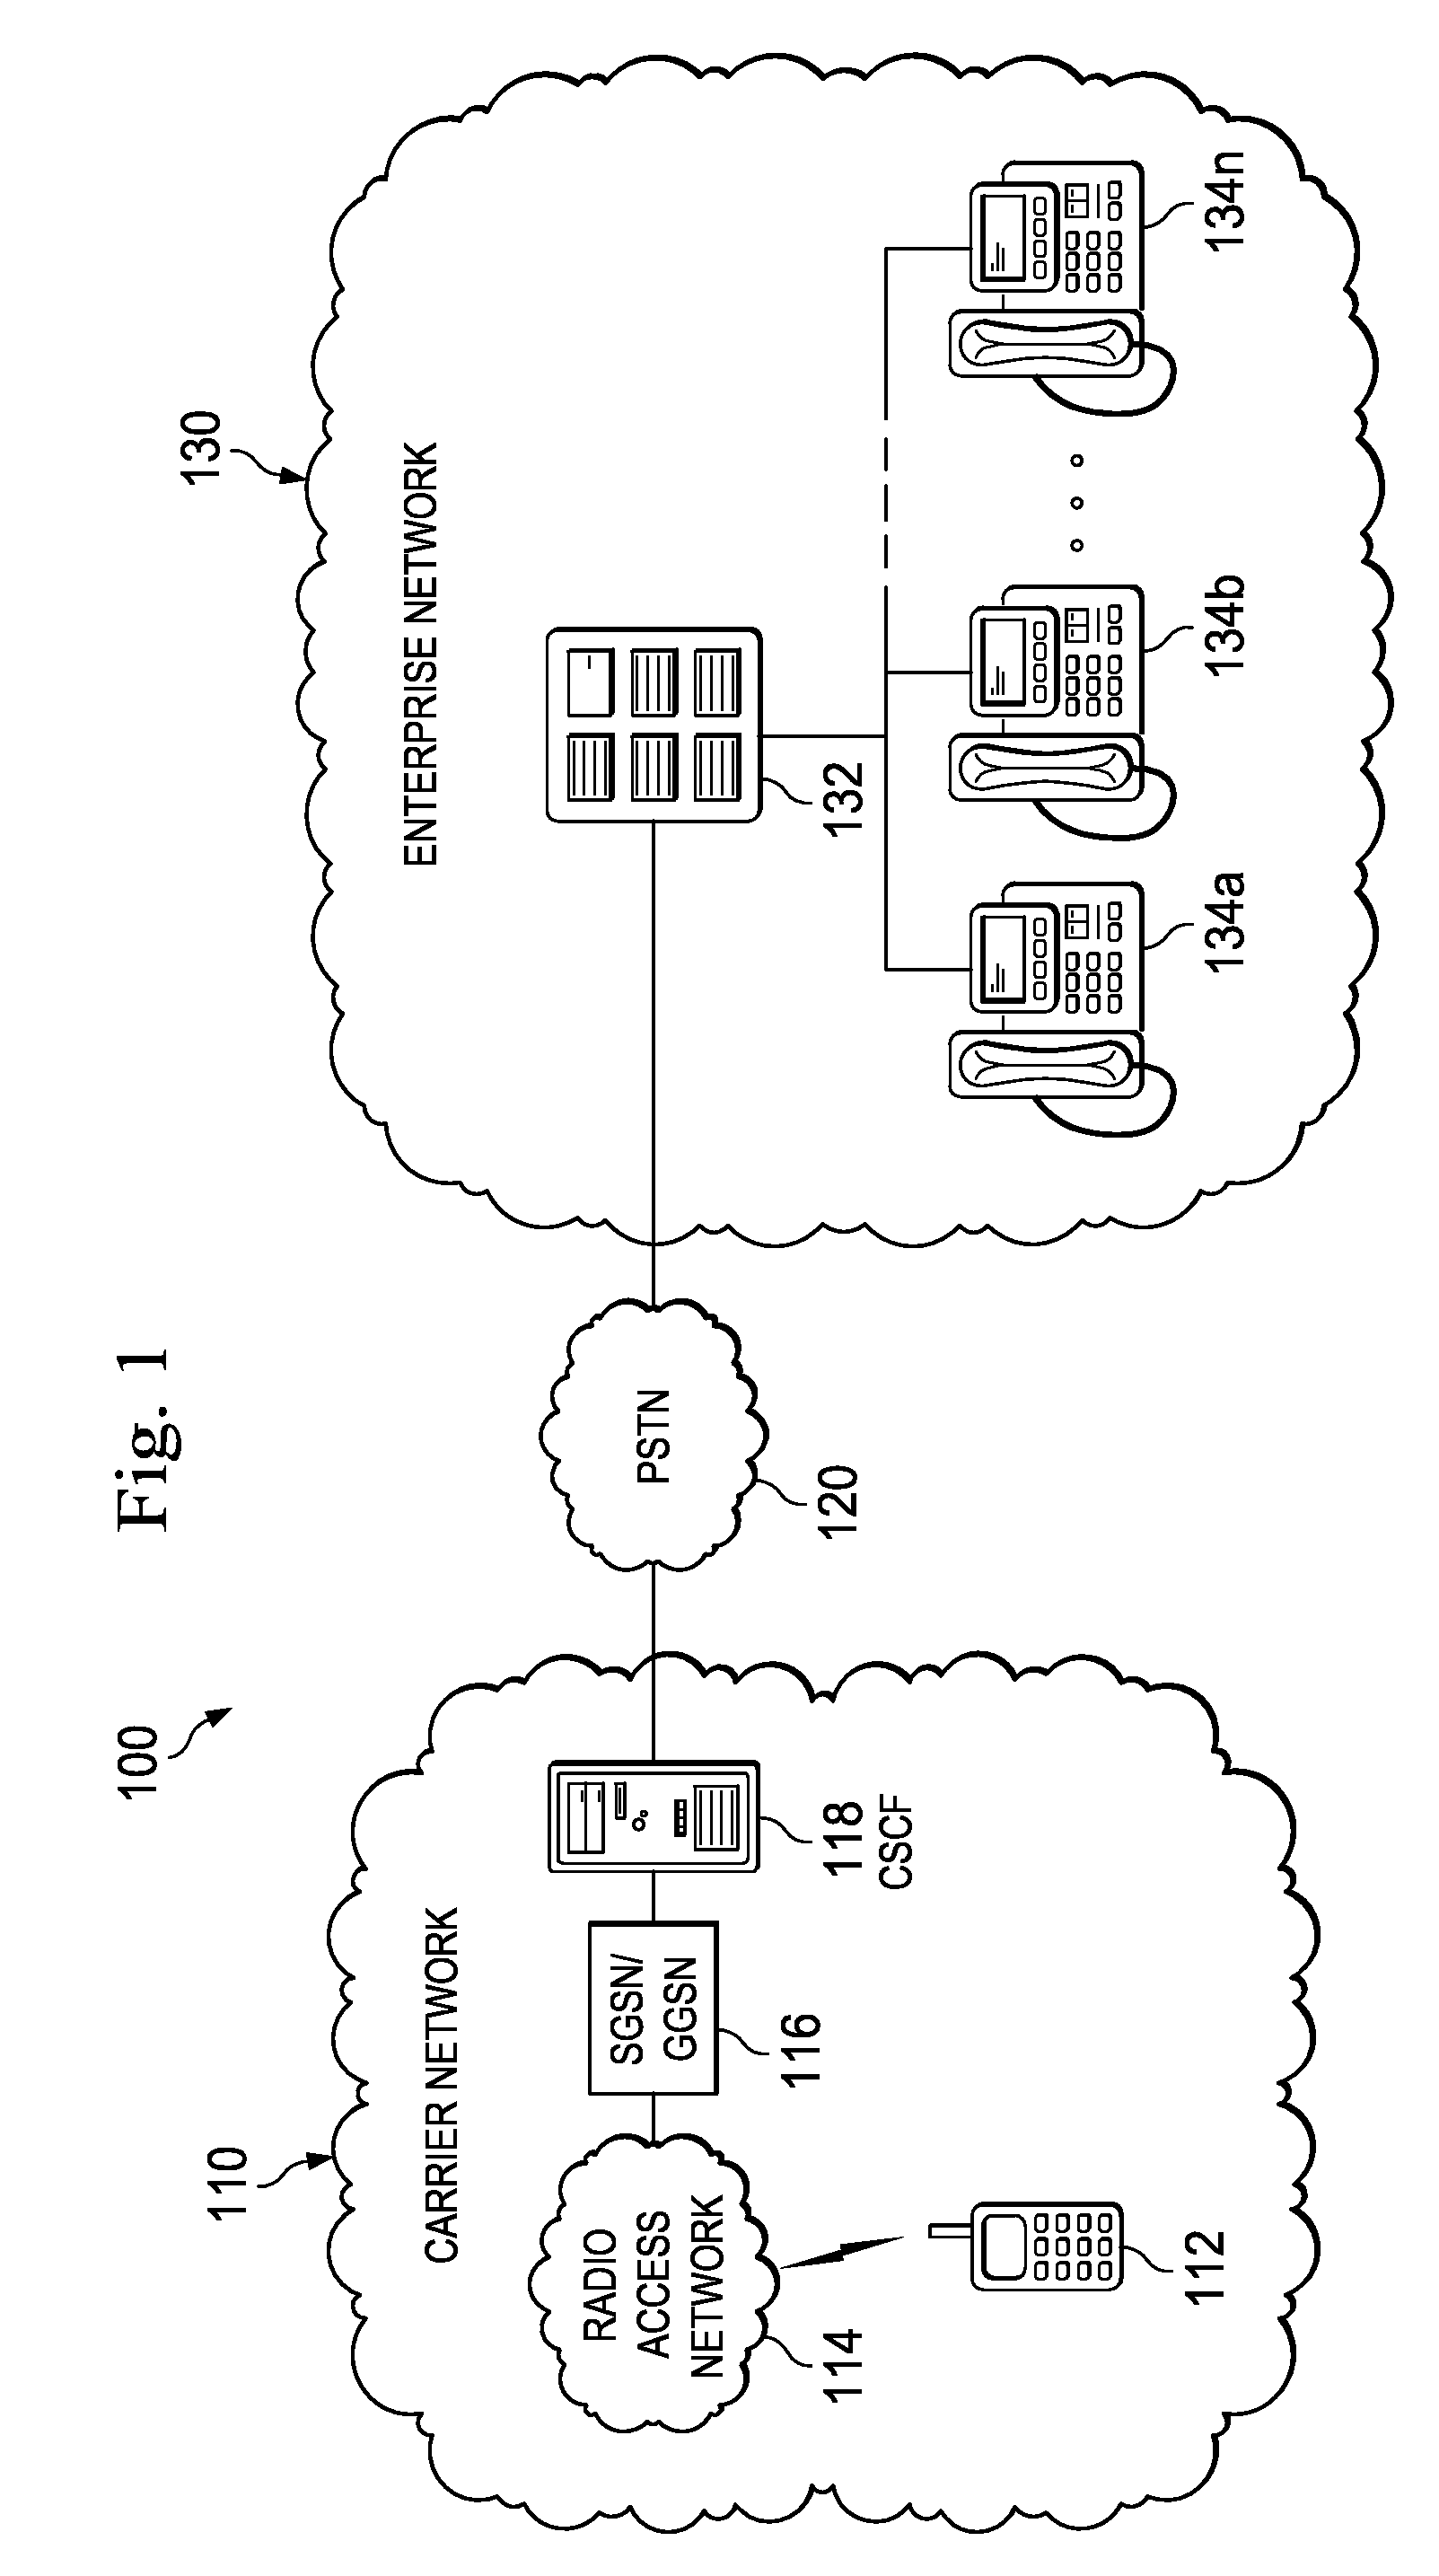 System, Method, and Computer-Readable Medium for By-Passing the Public Switched Telephone Network When Interconnecting an Enterprise Network and a Carrier Network